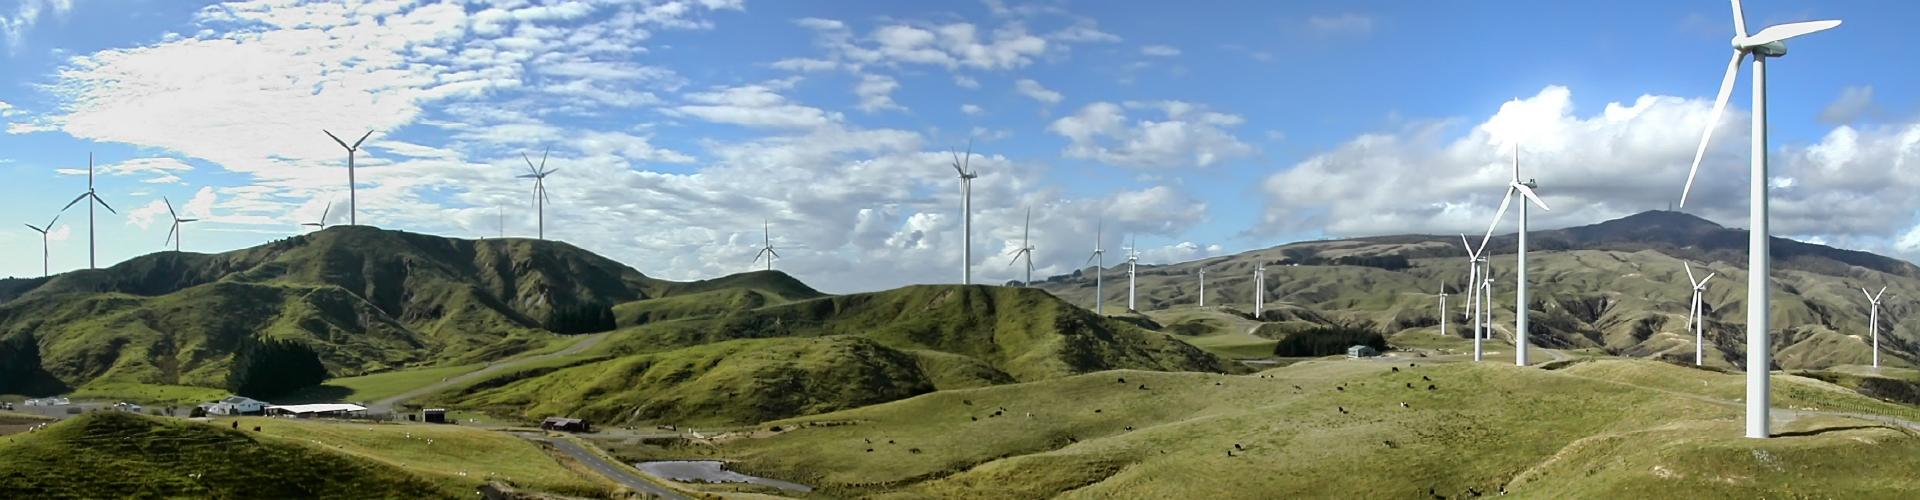 A wide angle of a wind farm in Palmerston North.